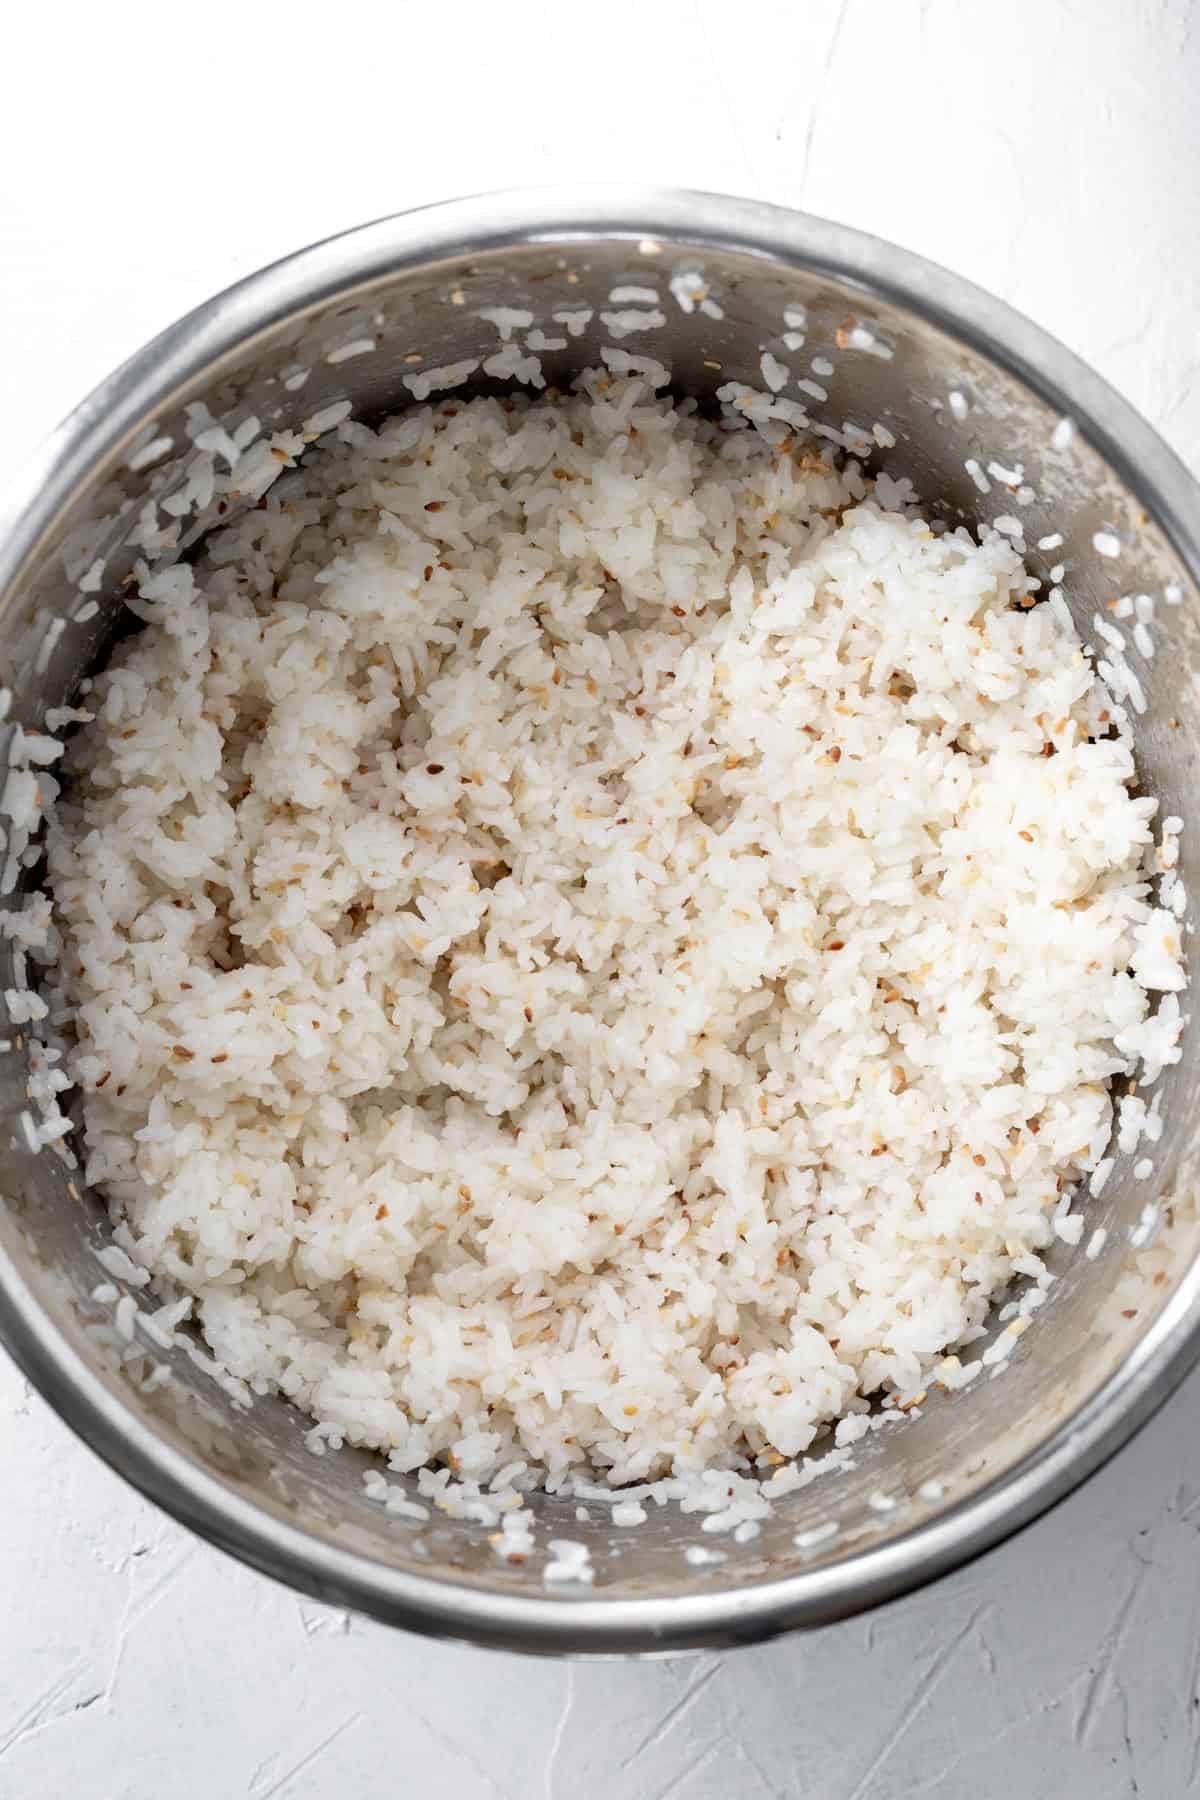 Cooked sushi rice mixed with vinegar and toasted sesame seeds in an instant pot.